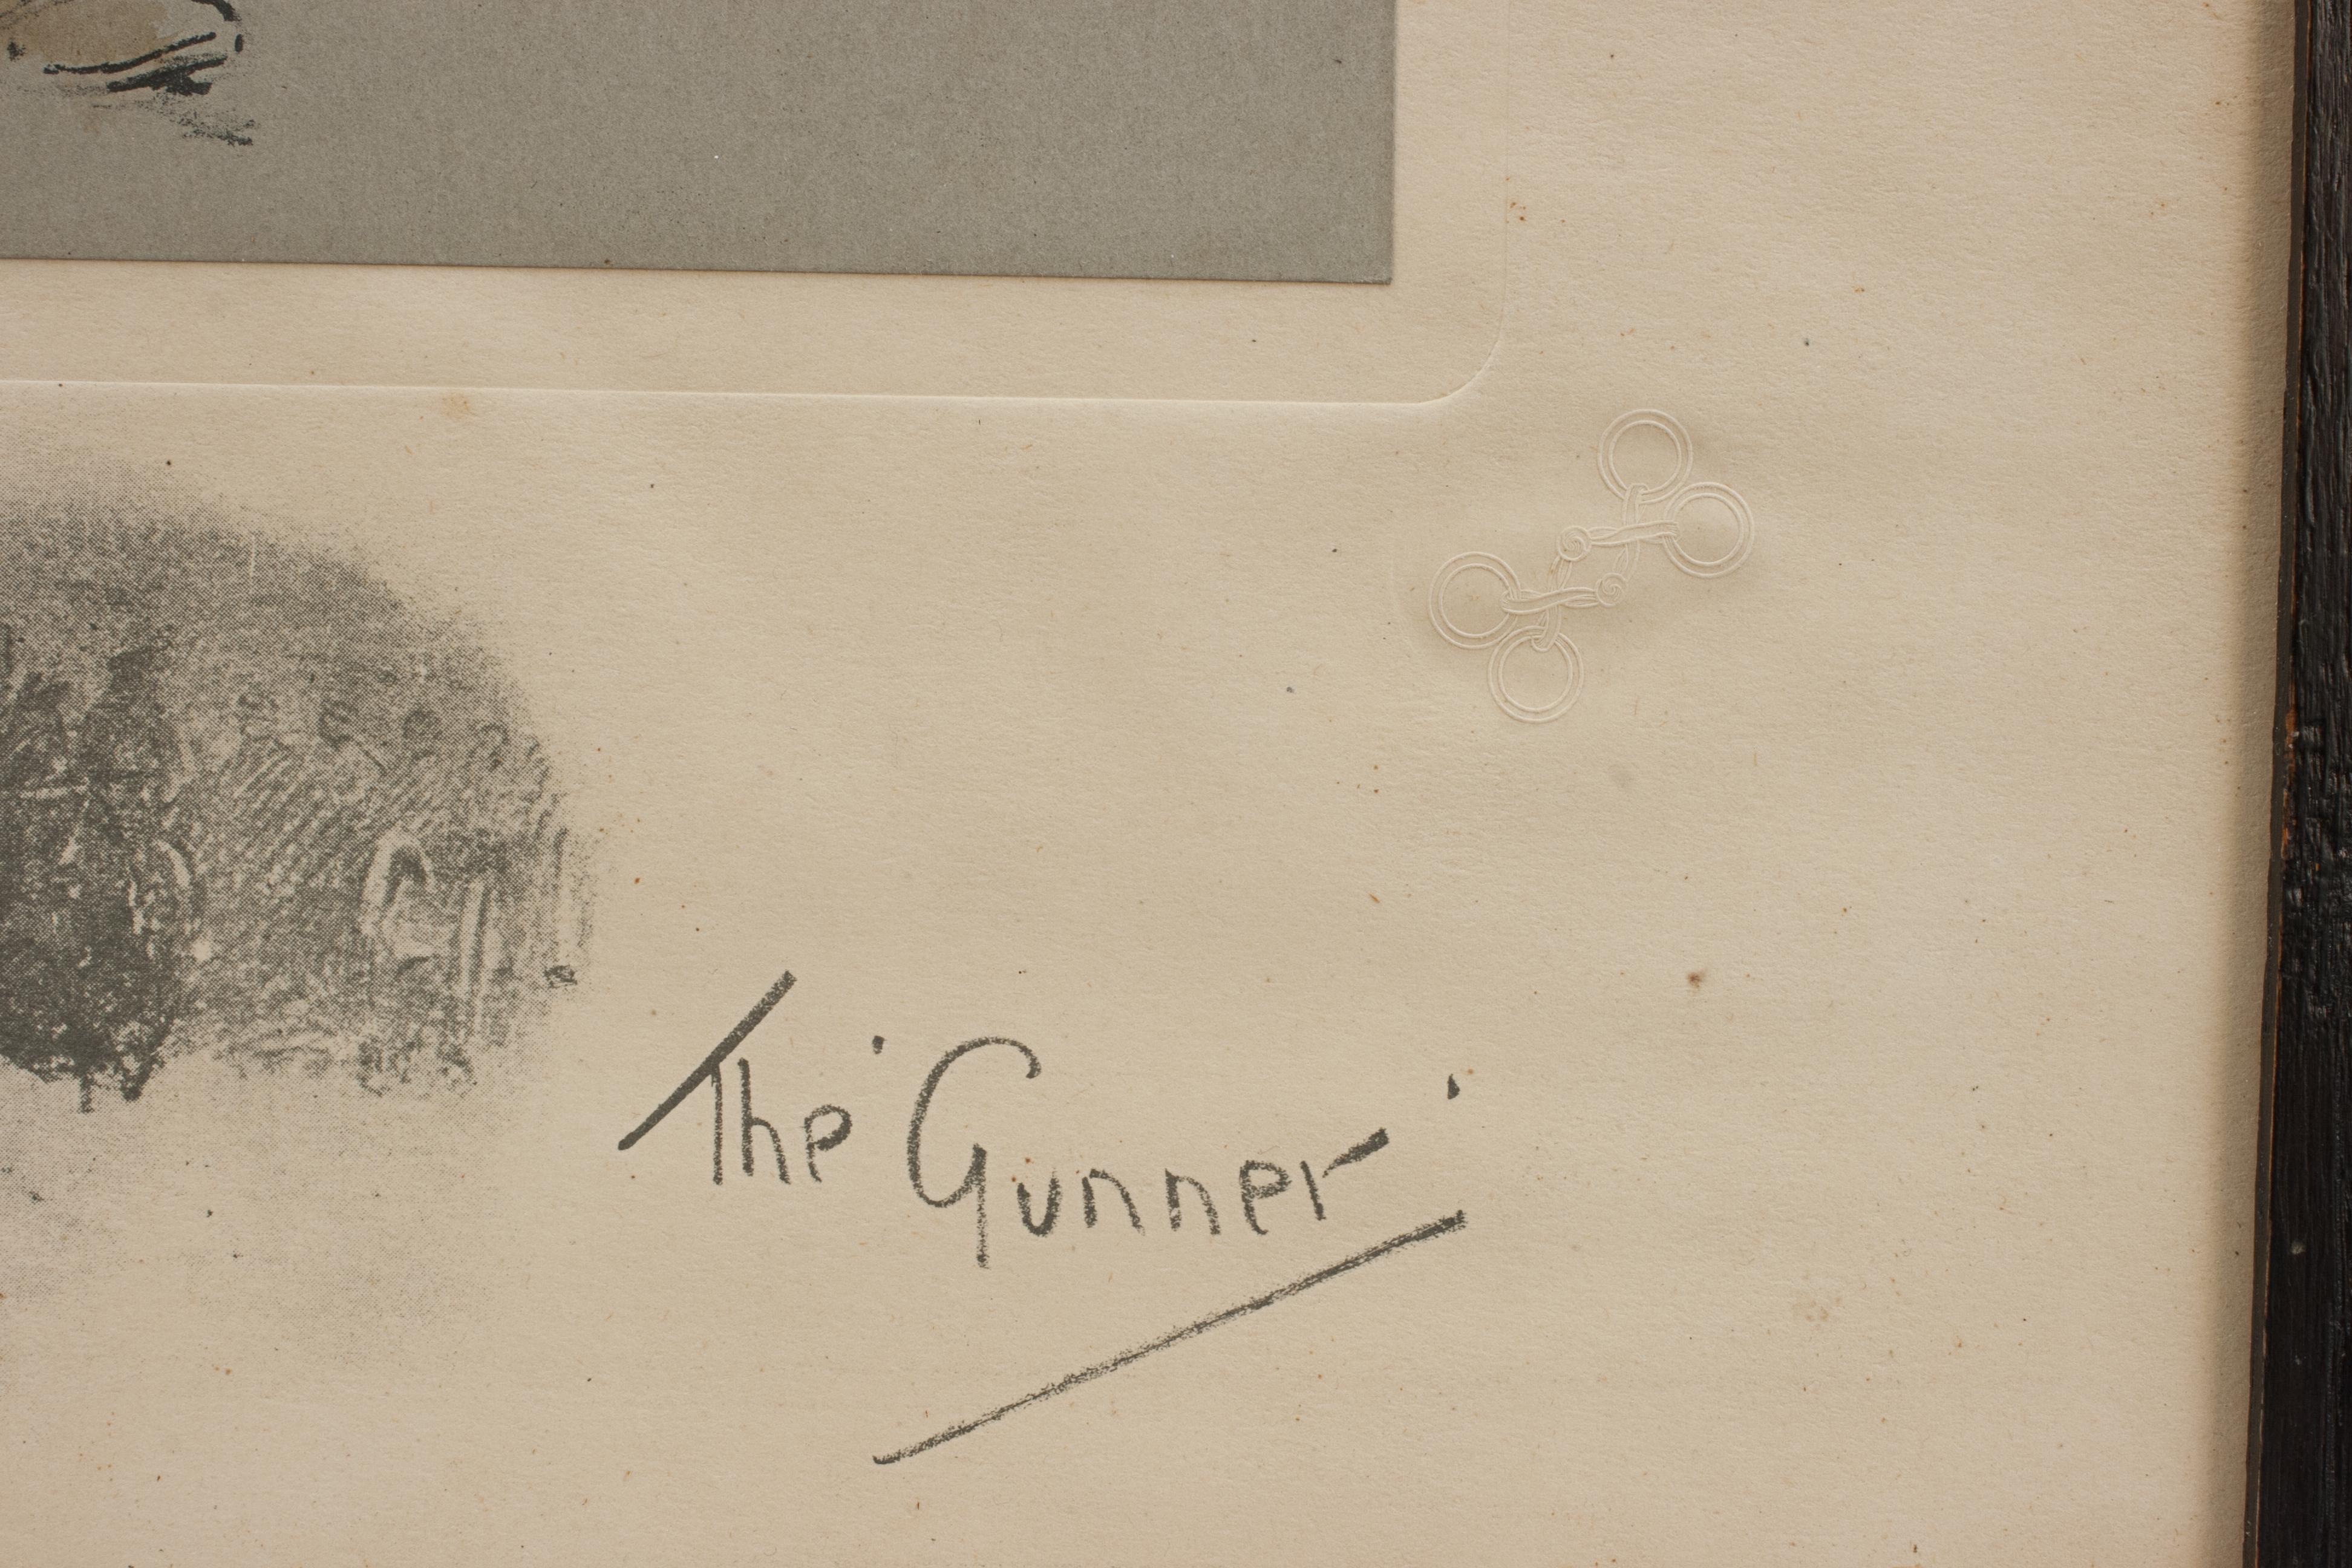 Military Print, The Gunner By Snaffles In Good Condition For Sale In Oxfordshire, GB